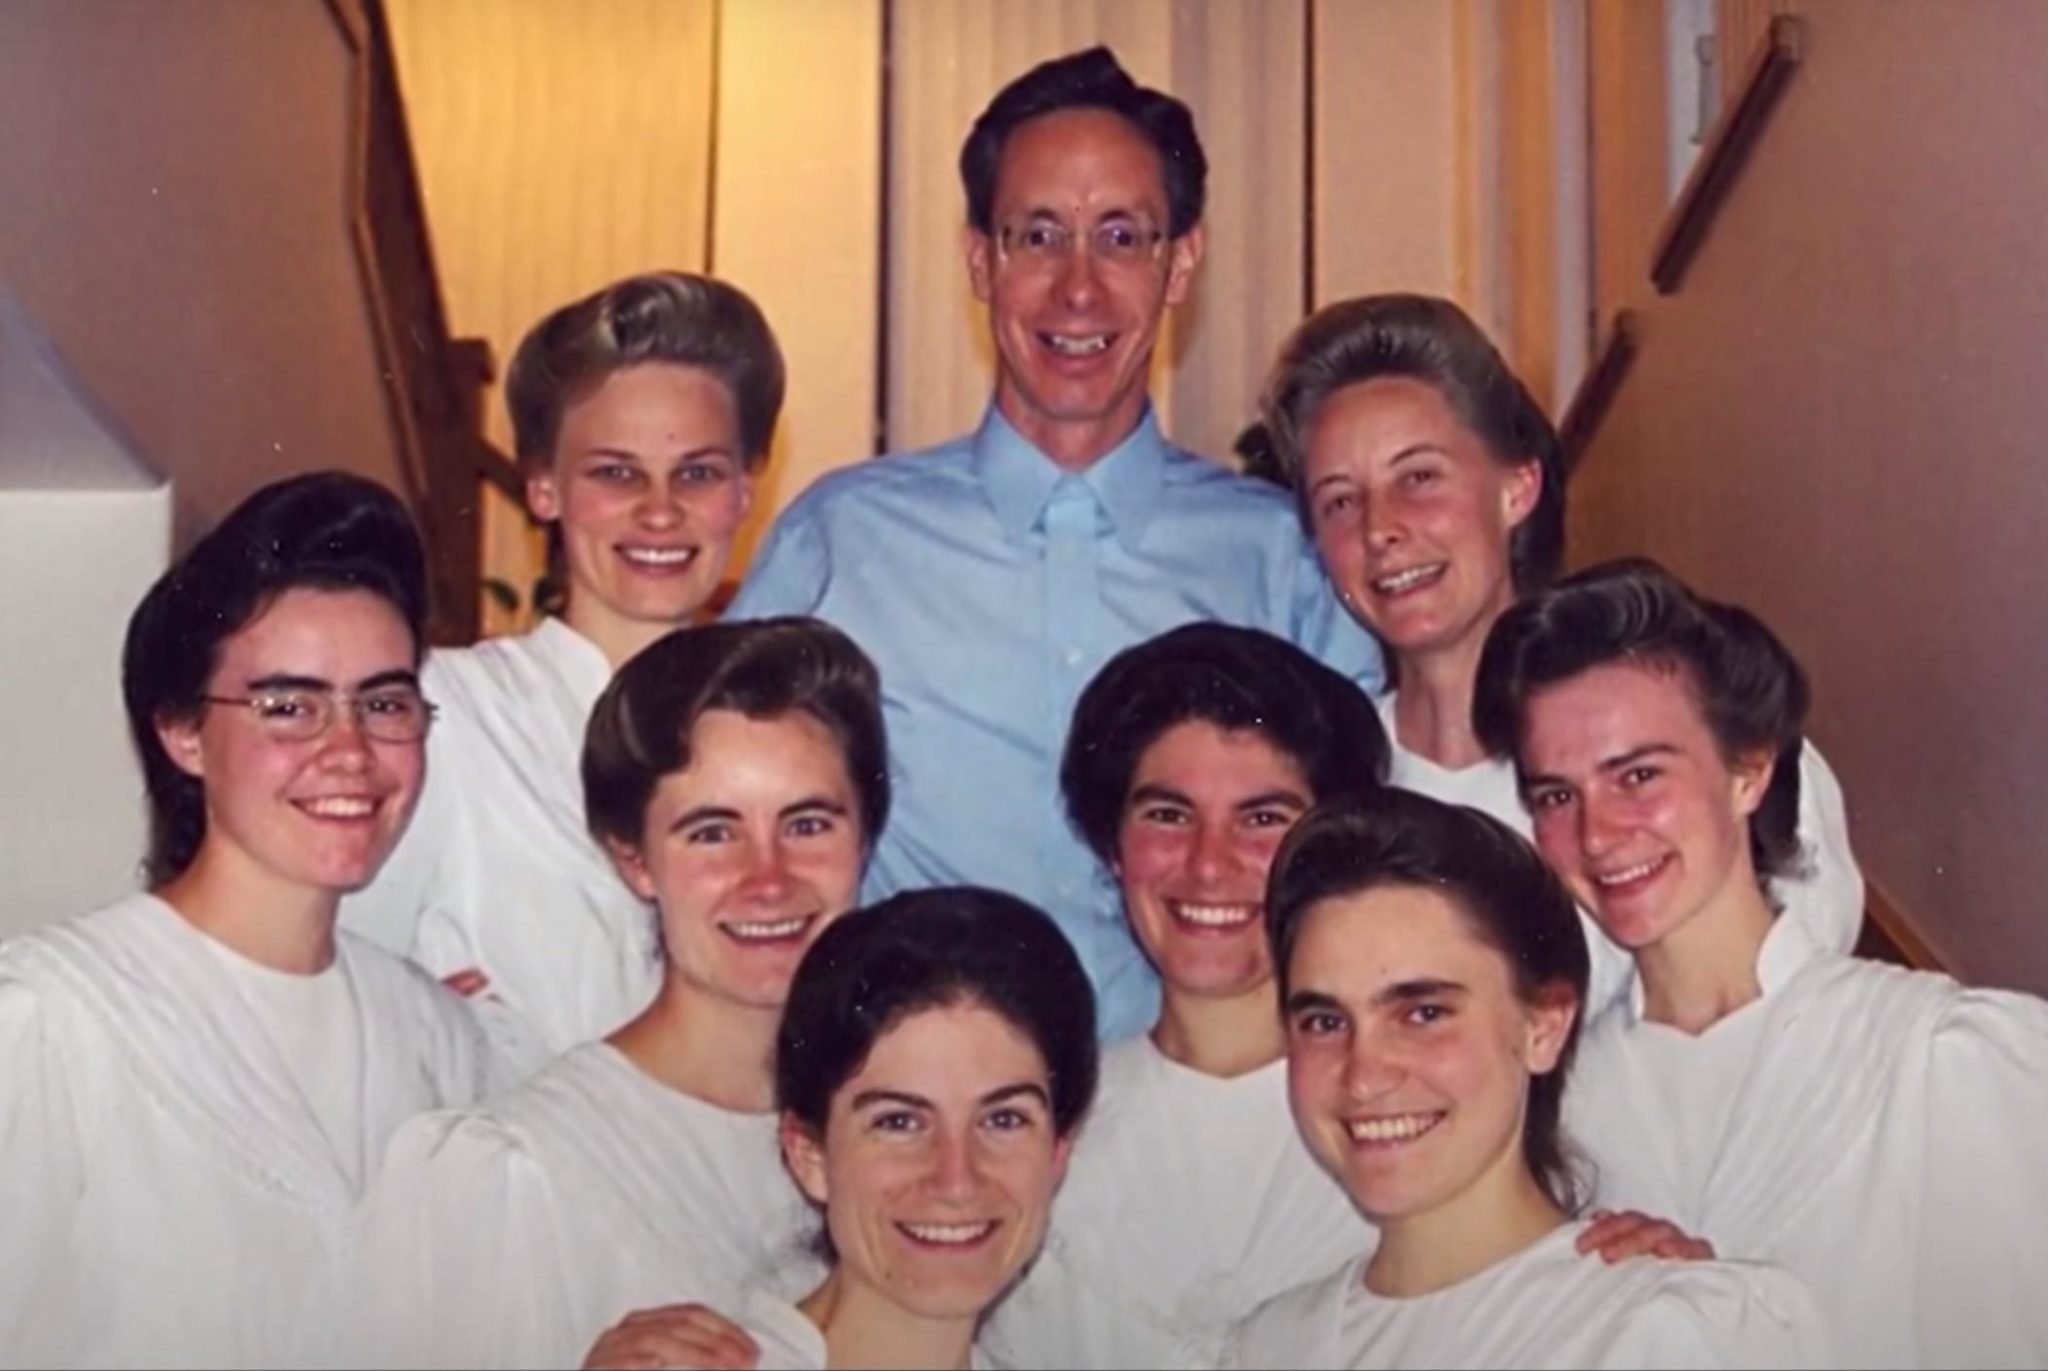 Did FLDS leader Warren Jeffs have a favourite wife? Where is she now?